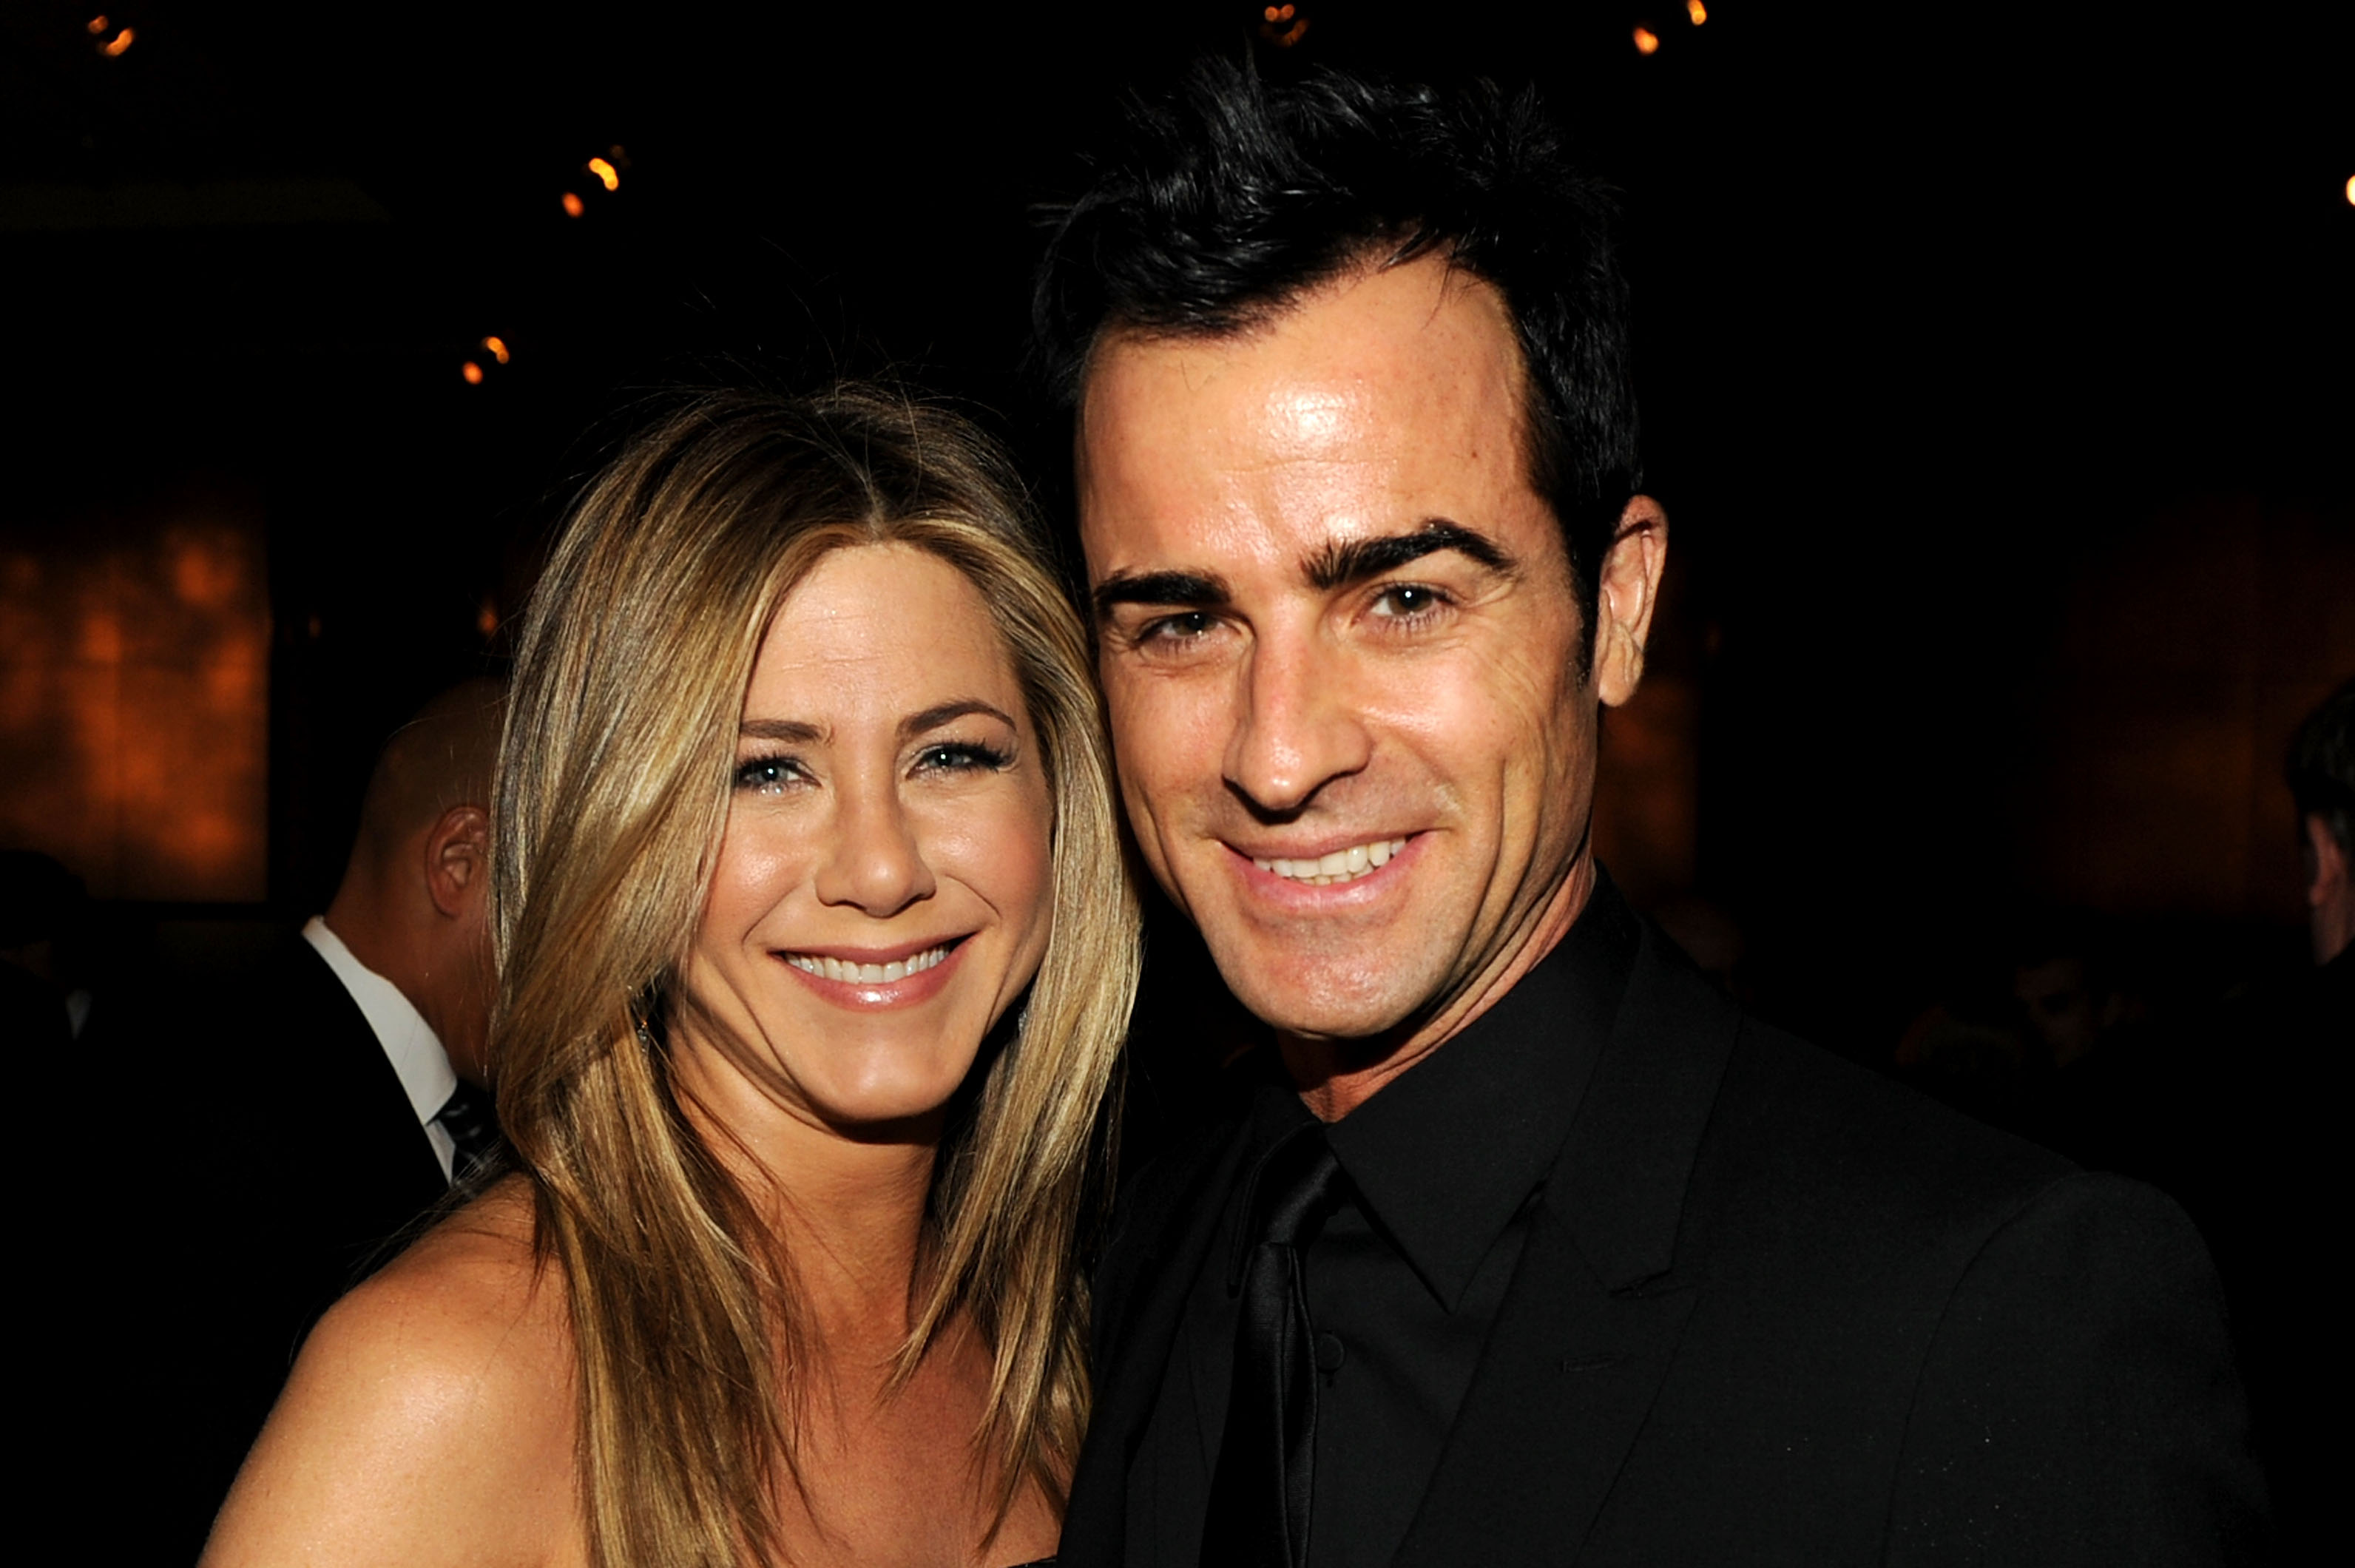 jennifer aniston and Justin Theroux in pictures